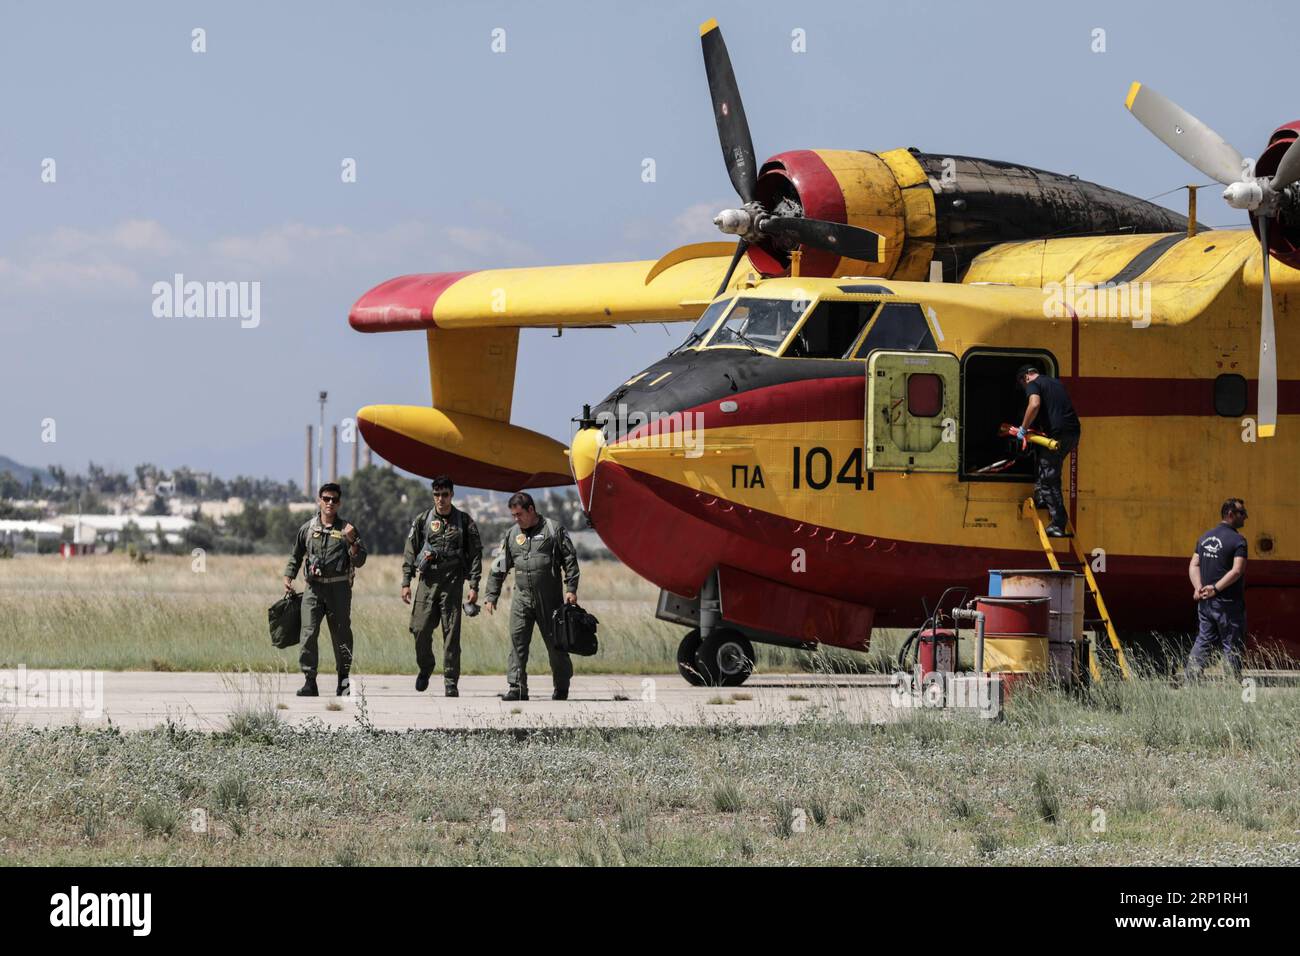 (180721) -- ATHENS, July 21, 2018 -- Pilots leave a firefighting aircraft at Elefsina Air Base, Athens, Greece, on July 20, 2018. The 355 Tactical Transport Squadron was established in 1947 to fight wildfires. ) (zcc) GREECE-ATHENS-FIREFIGHTING SQUADRON LefterisxPartsalis PUBLICATIONxNOTxINxCHN Stock Photo